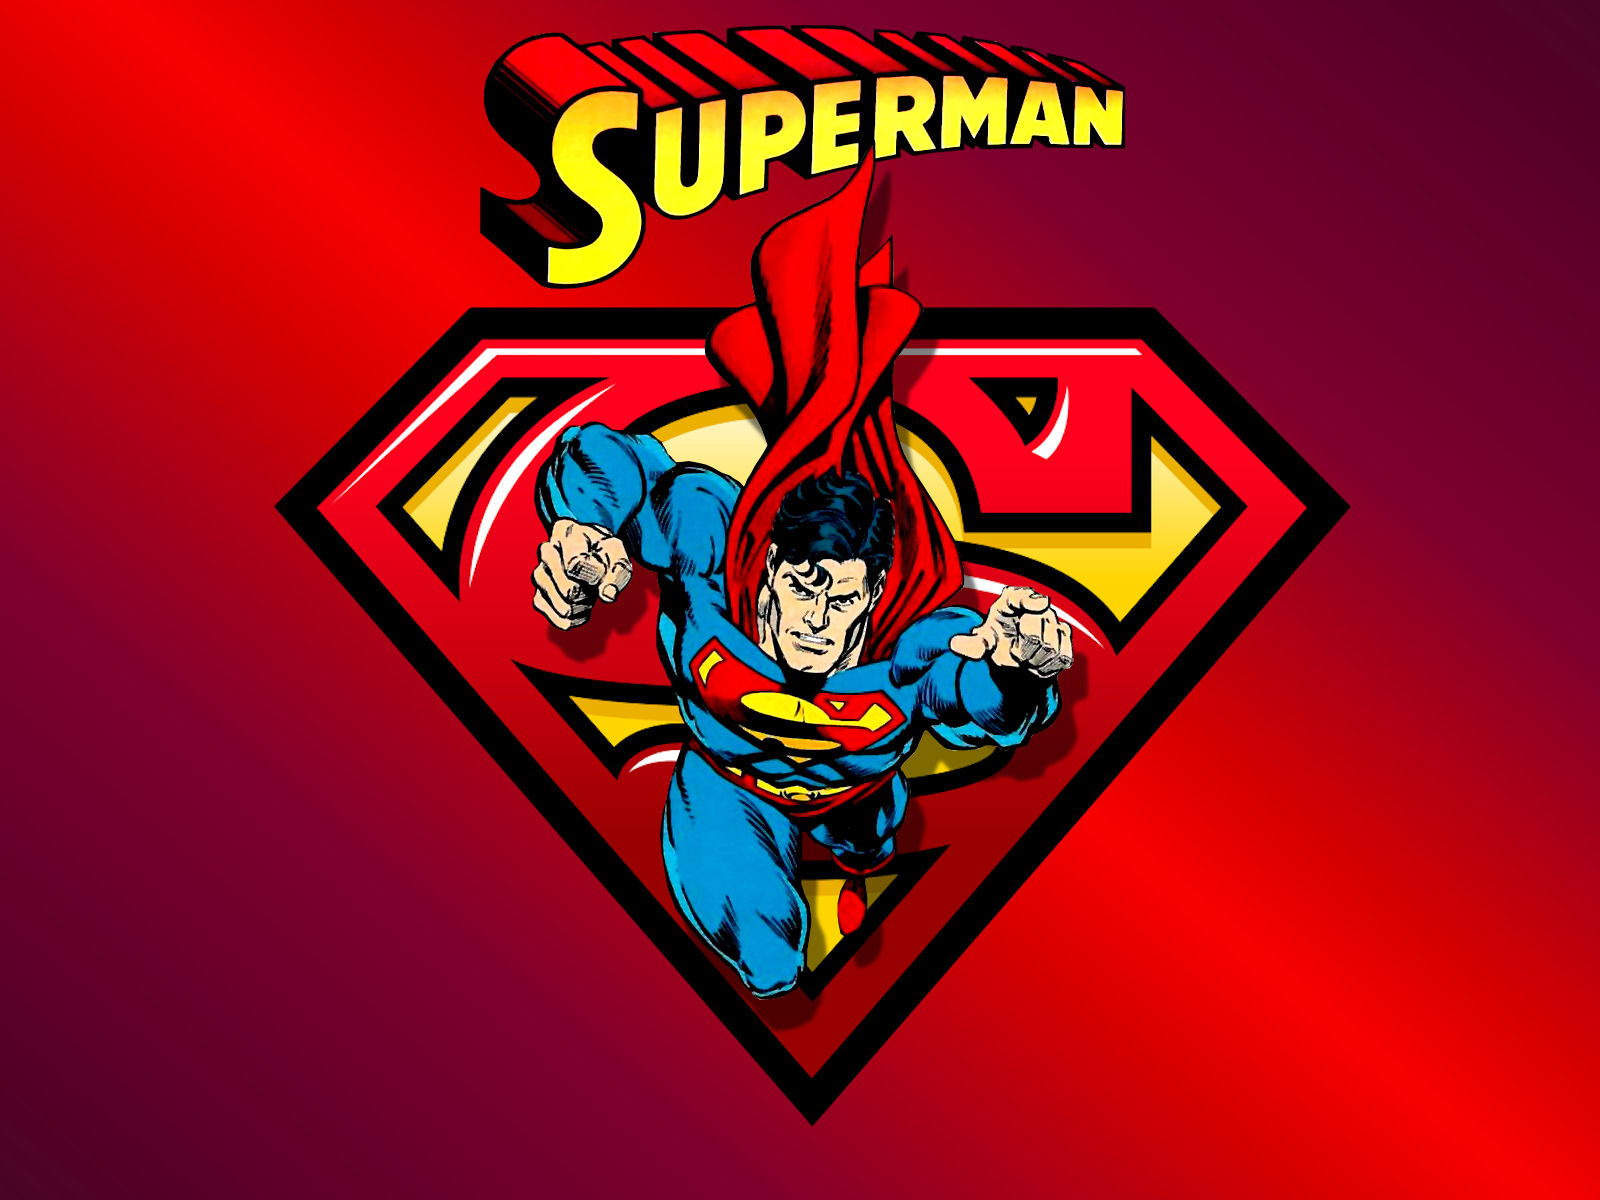 Superman Wallpaper 1 by Superman8193 on